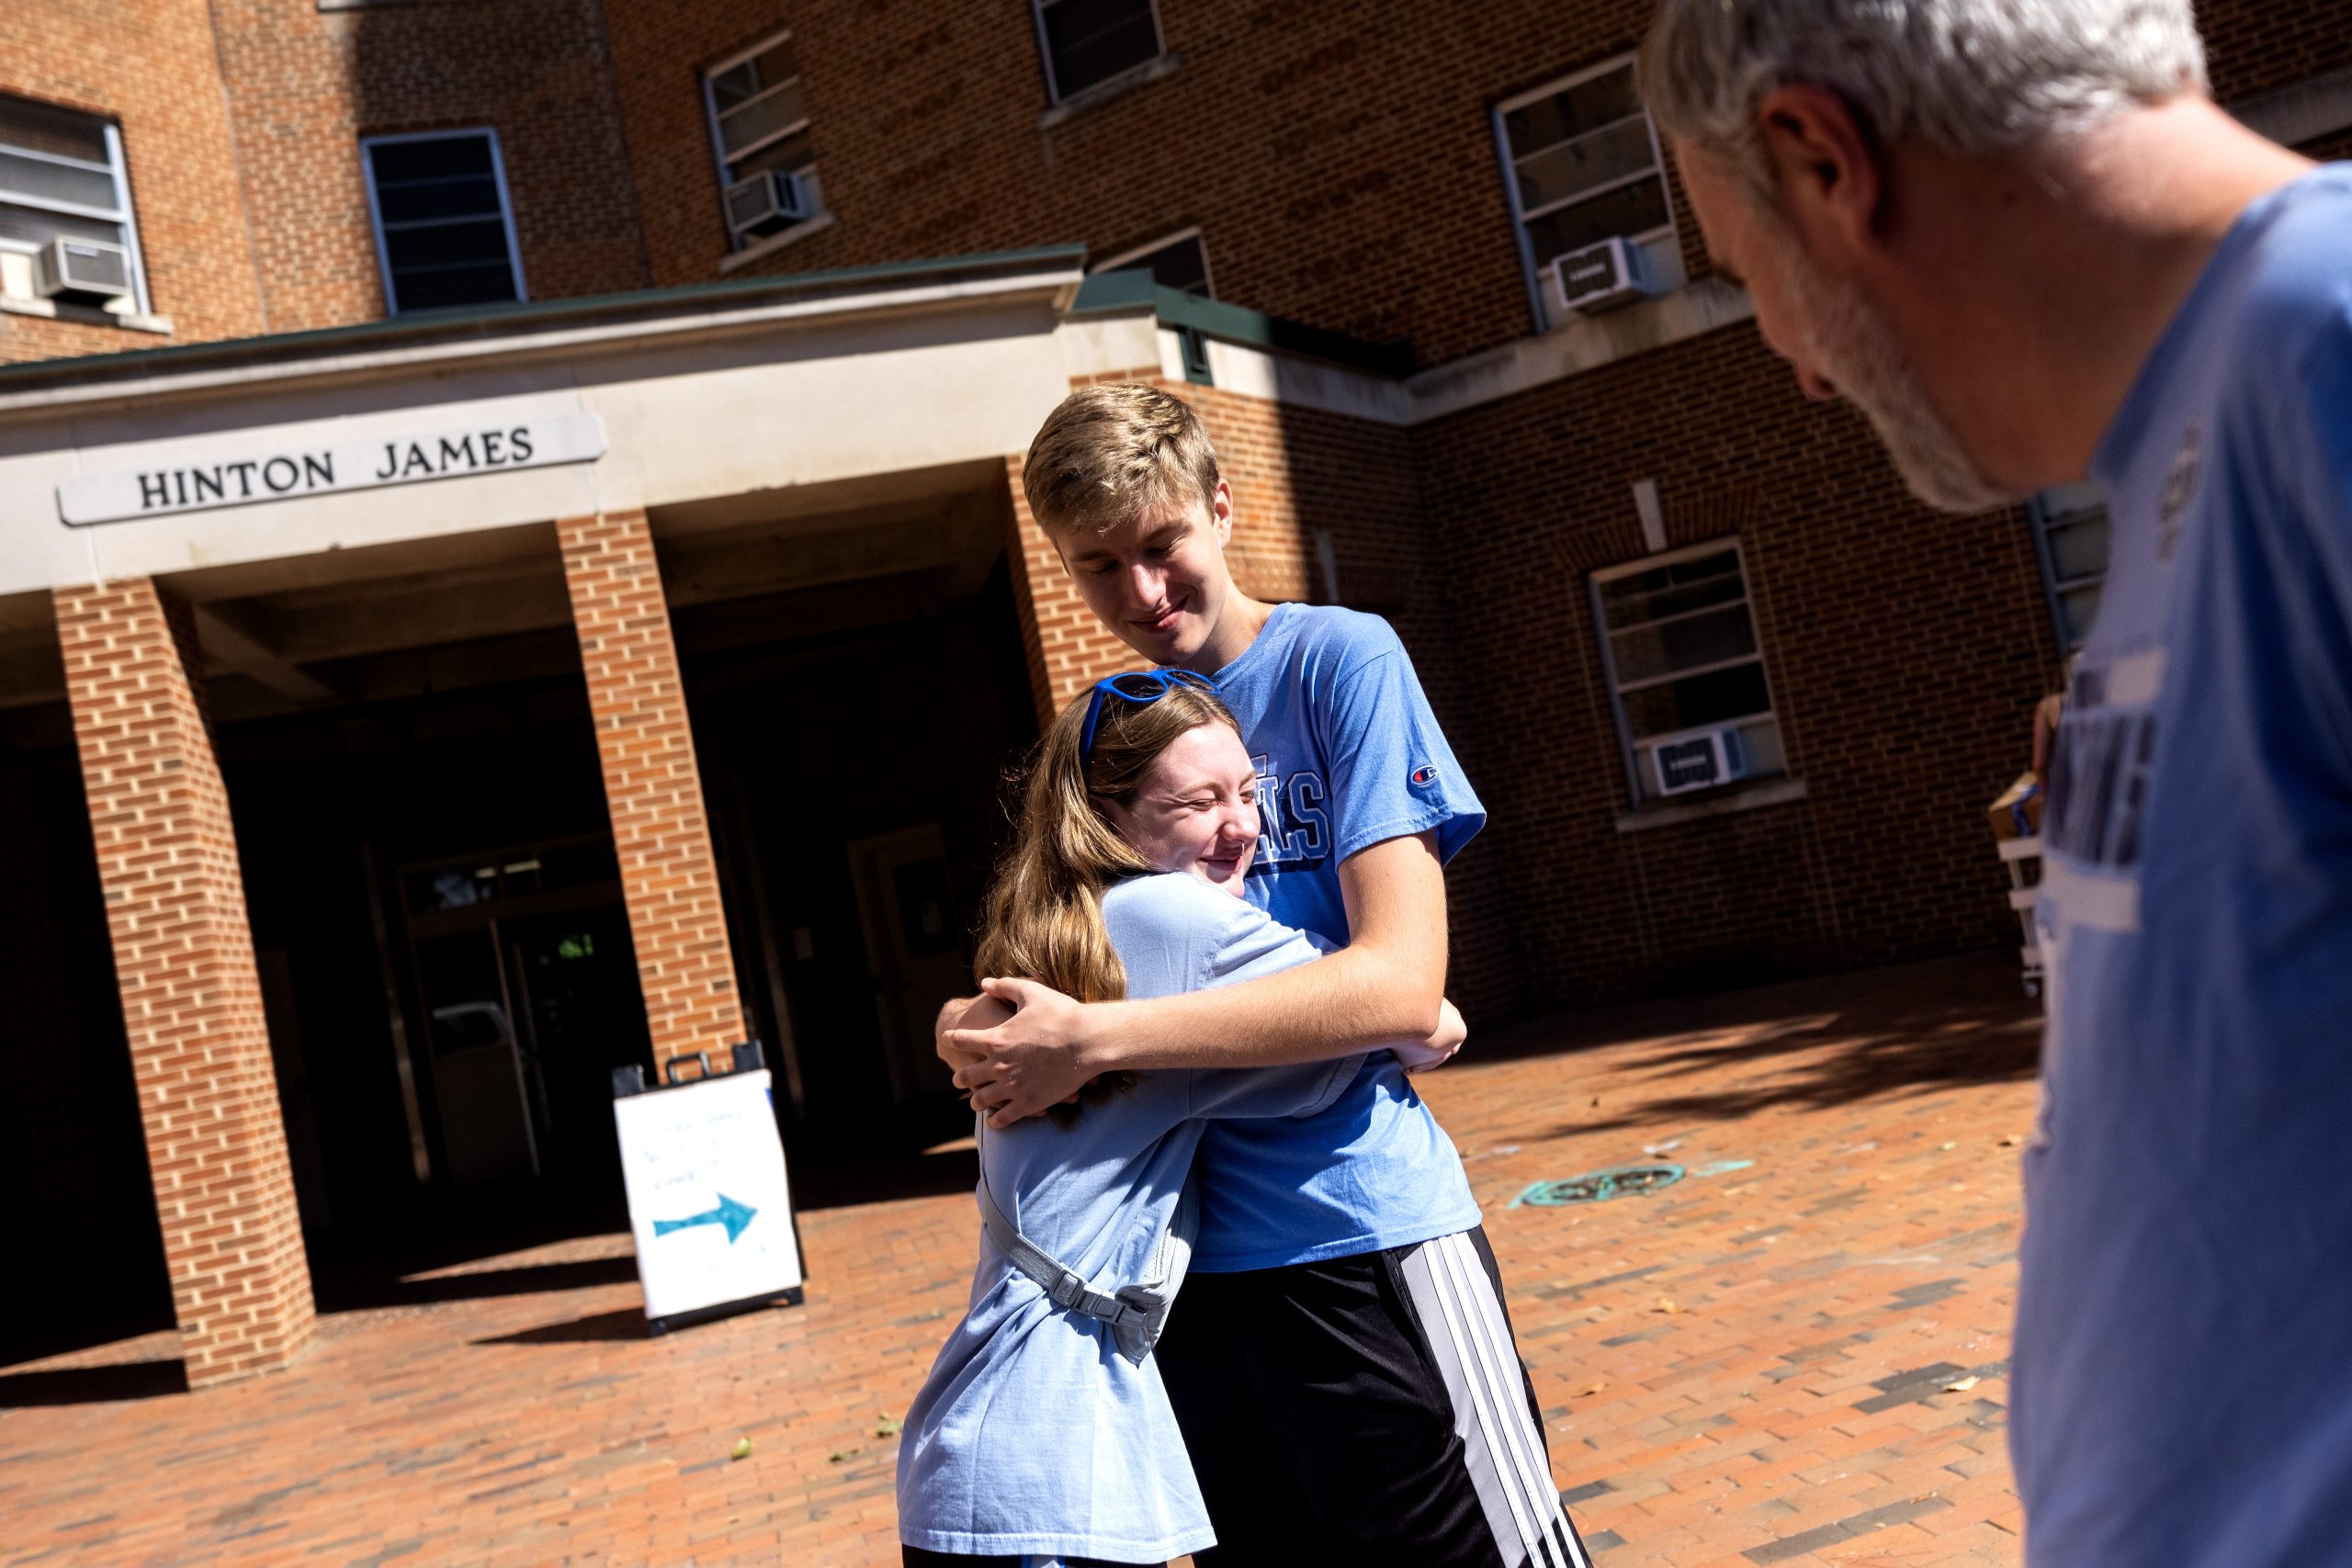 An incoming first-year college student hugging his sister outside of a residence hall on the campus of UNC-Chapel Hill.